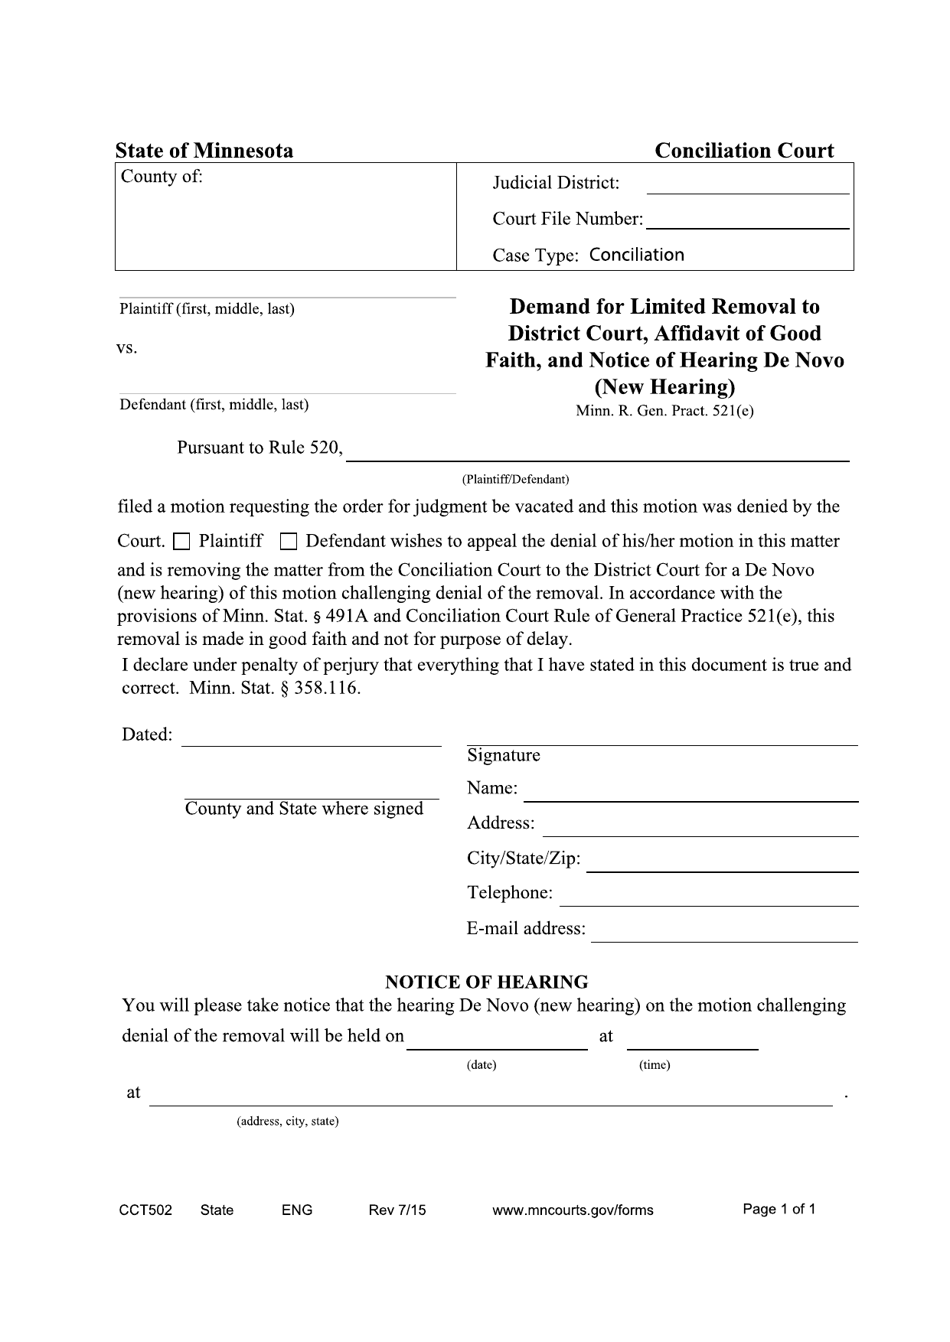 Form CCT502 Demand for Limited Removal - Minnesota, Page 1